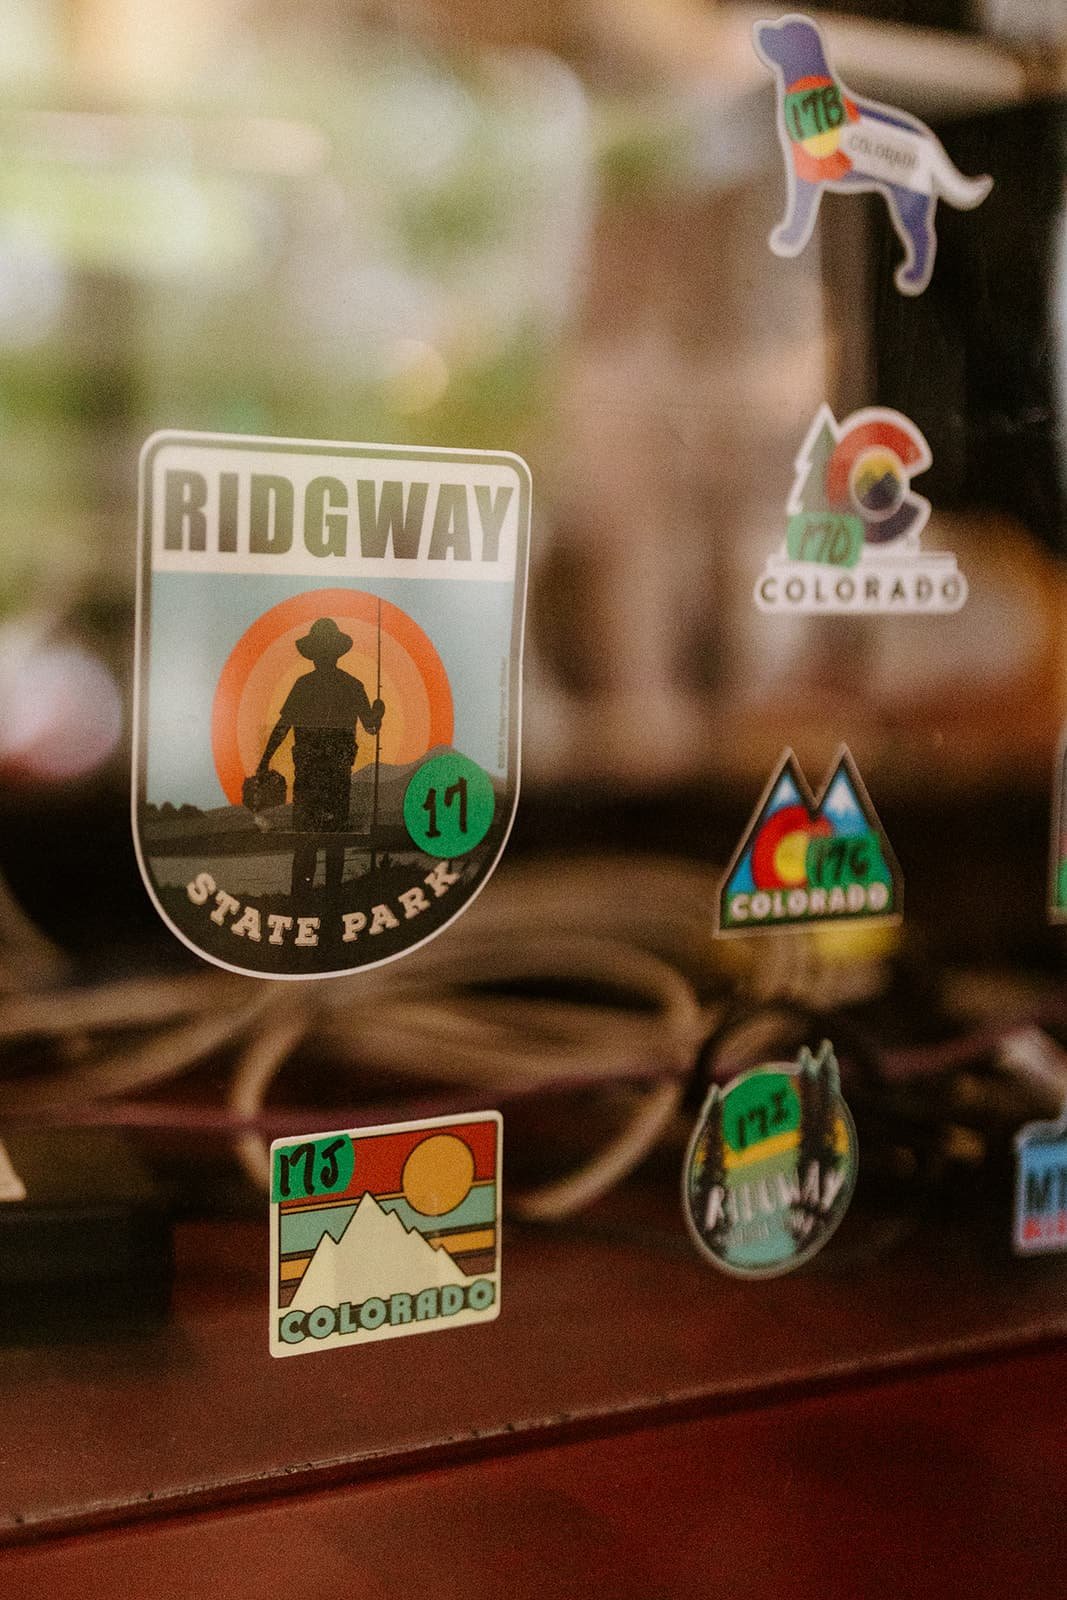 Ridgway State Park stickers and patches for sale in their visitor center